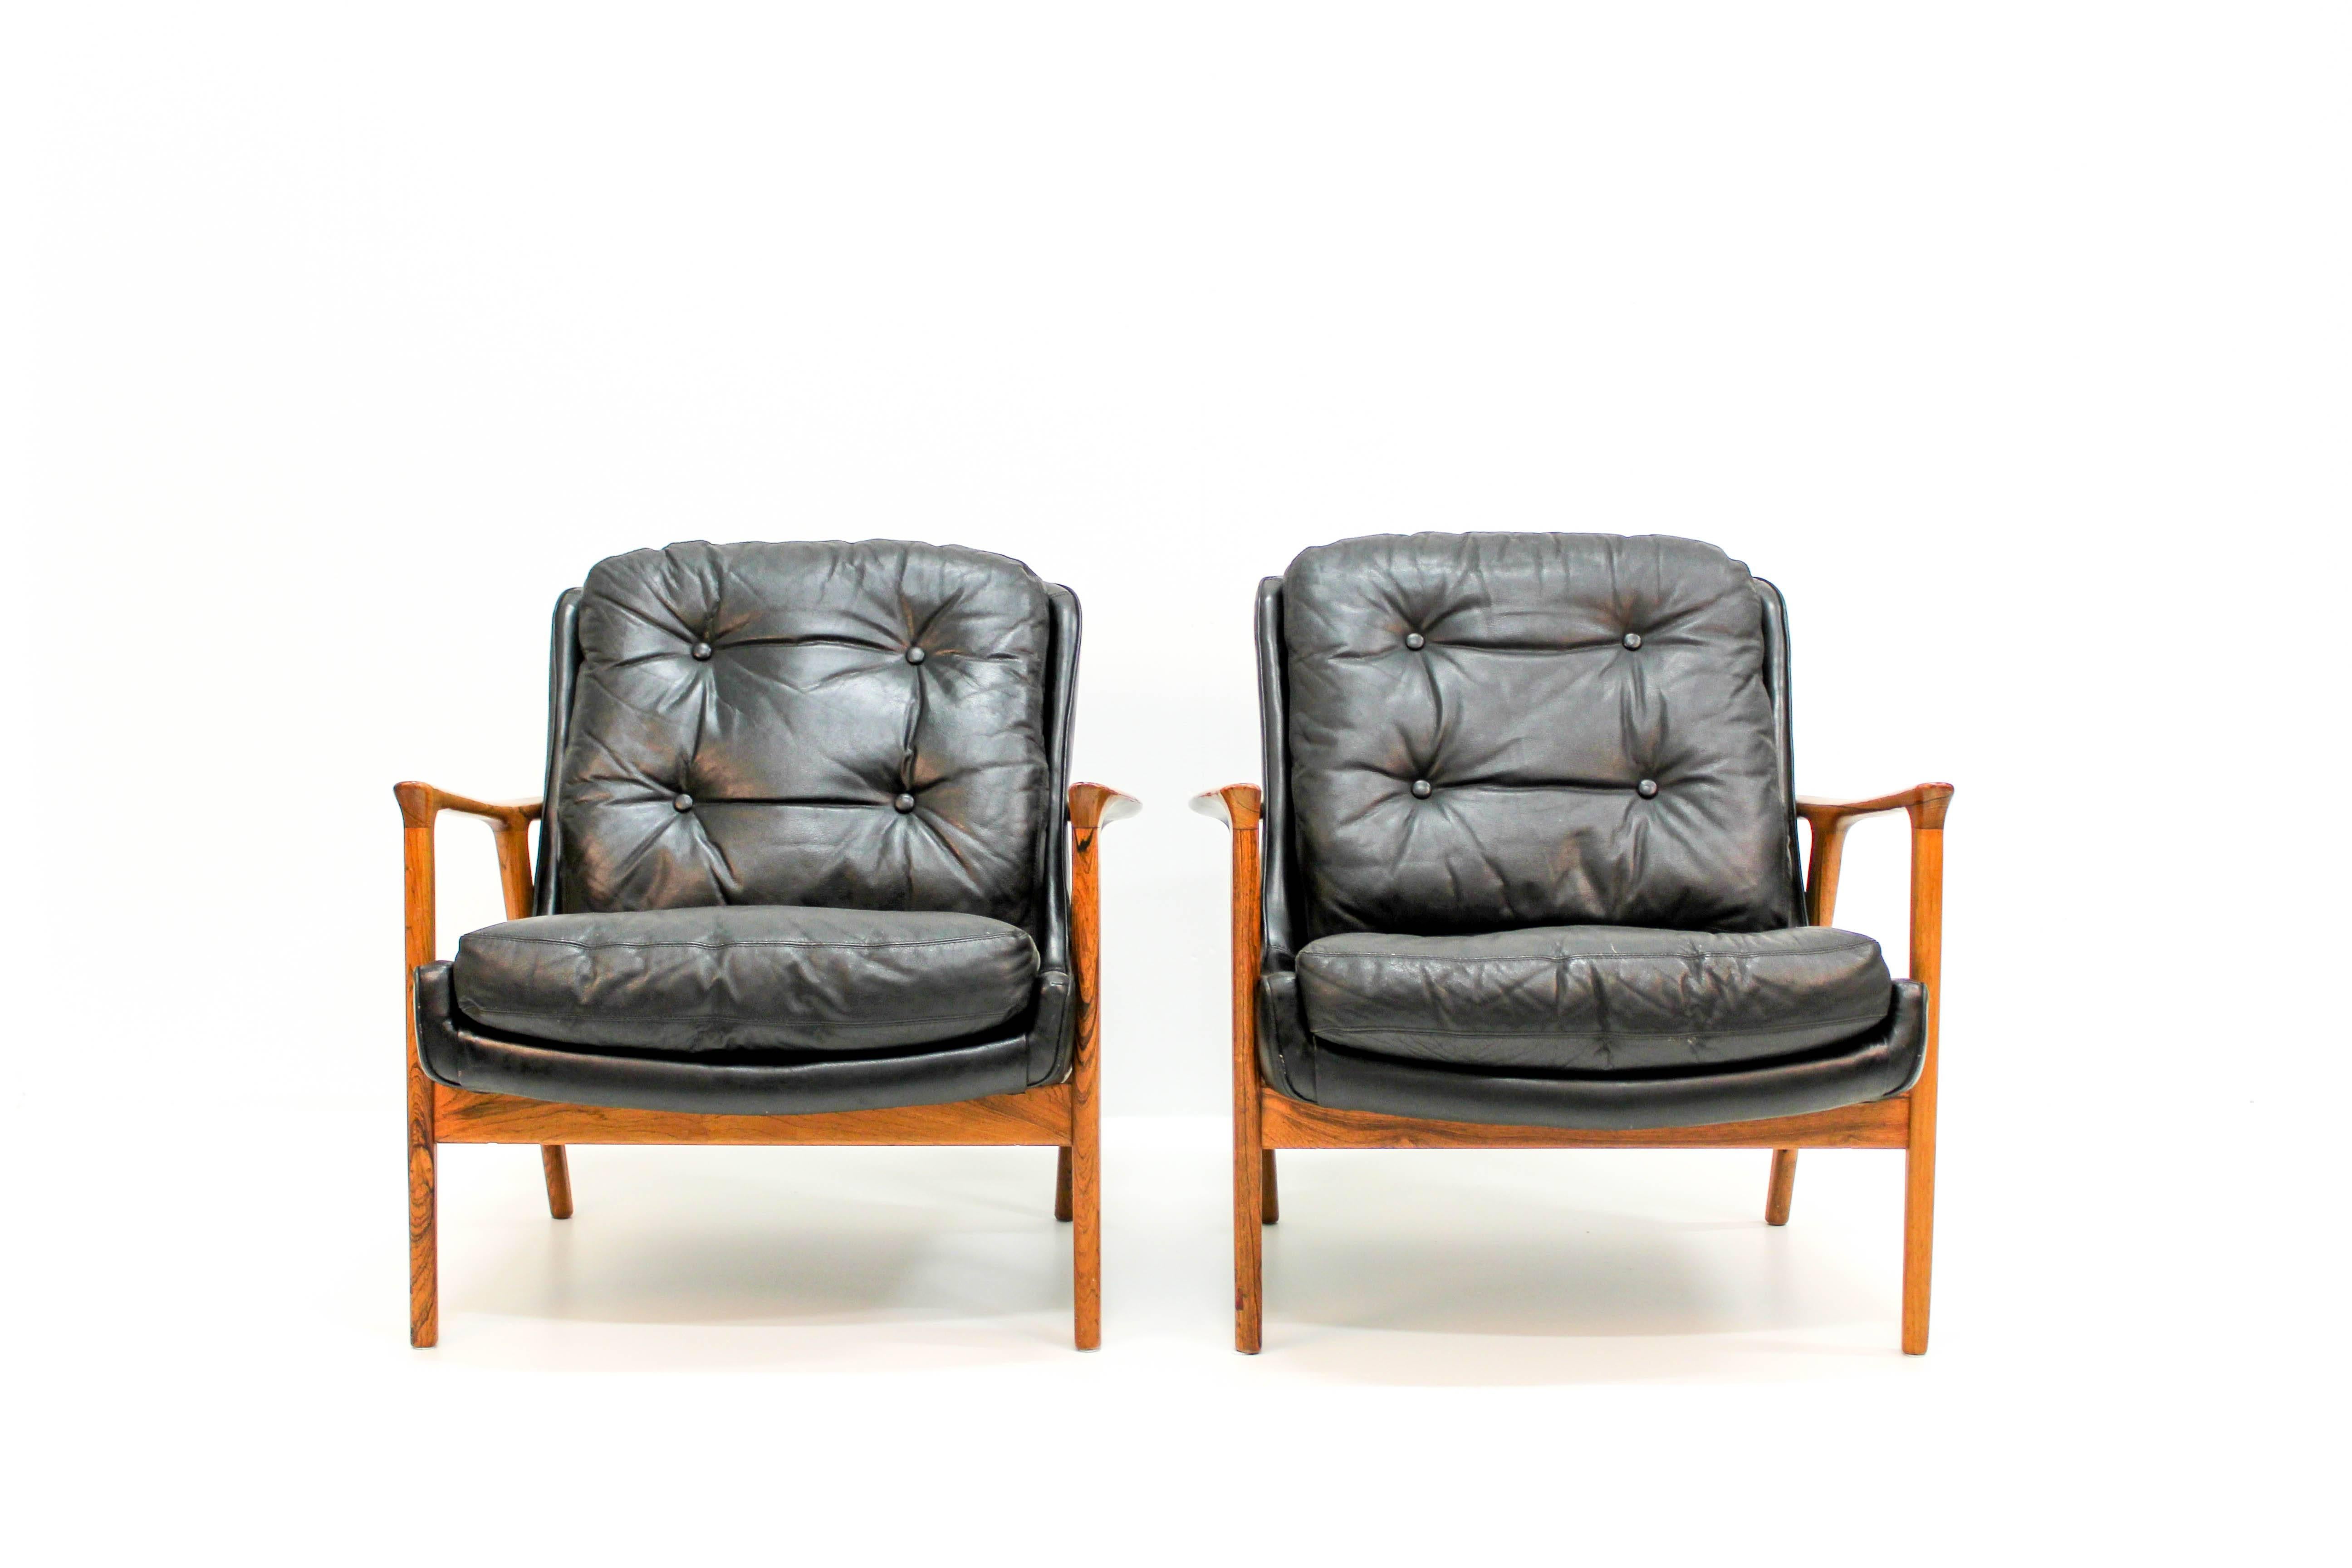 Midcentury lounge chairs by Inge Andersson for Bröderna Andersson. These chairs has original black leather upholstery and rosewood frames. High comfort combined with high quality materials makes these chairs both decorative and comfortable.